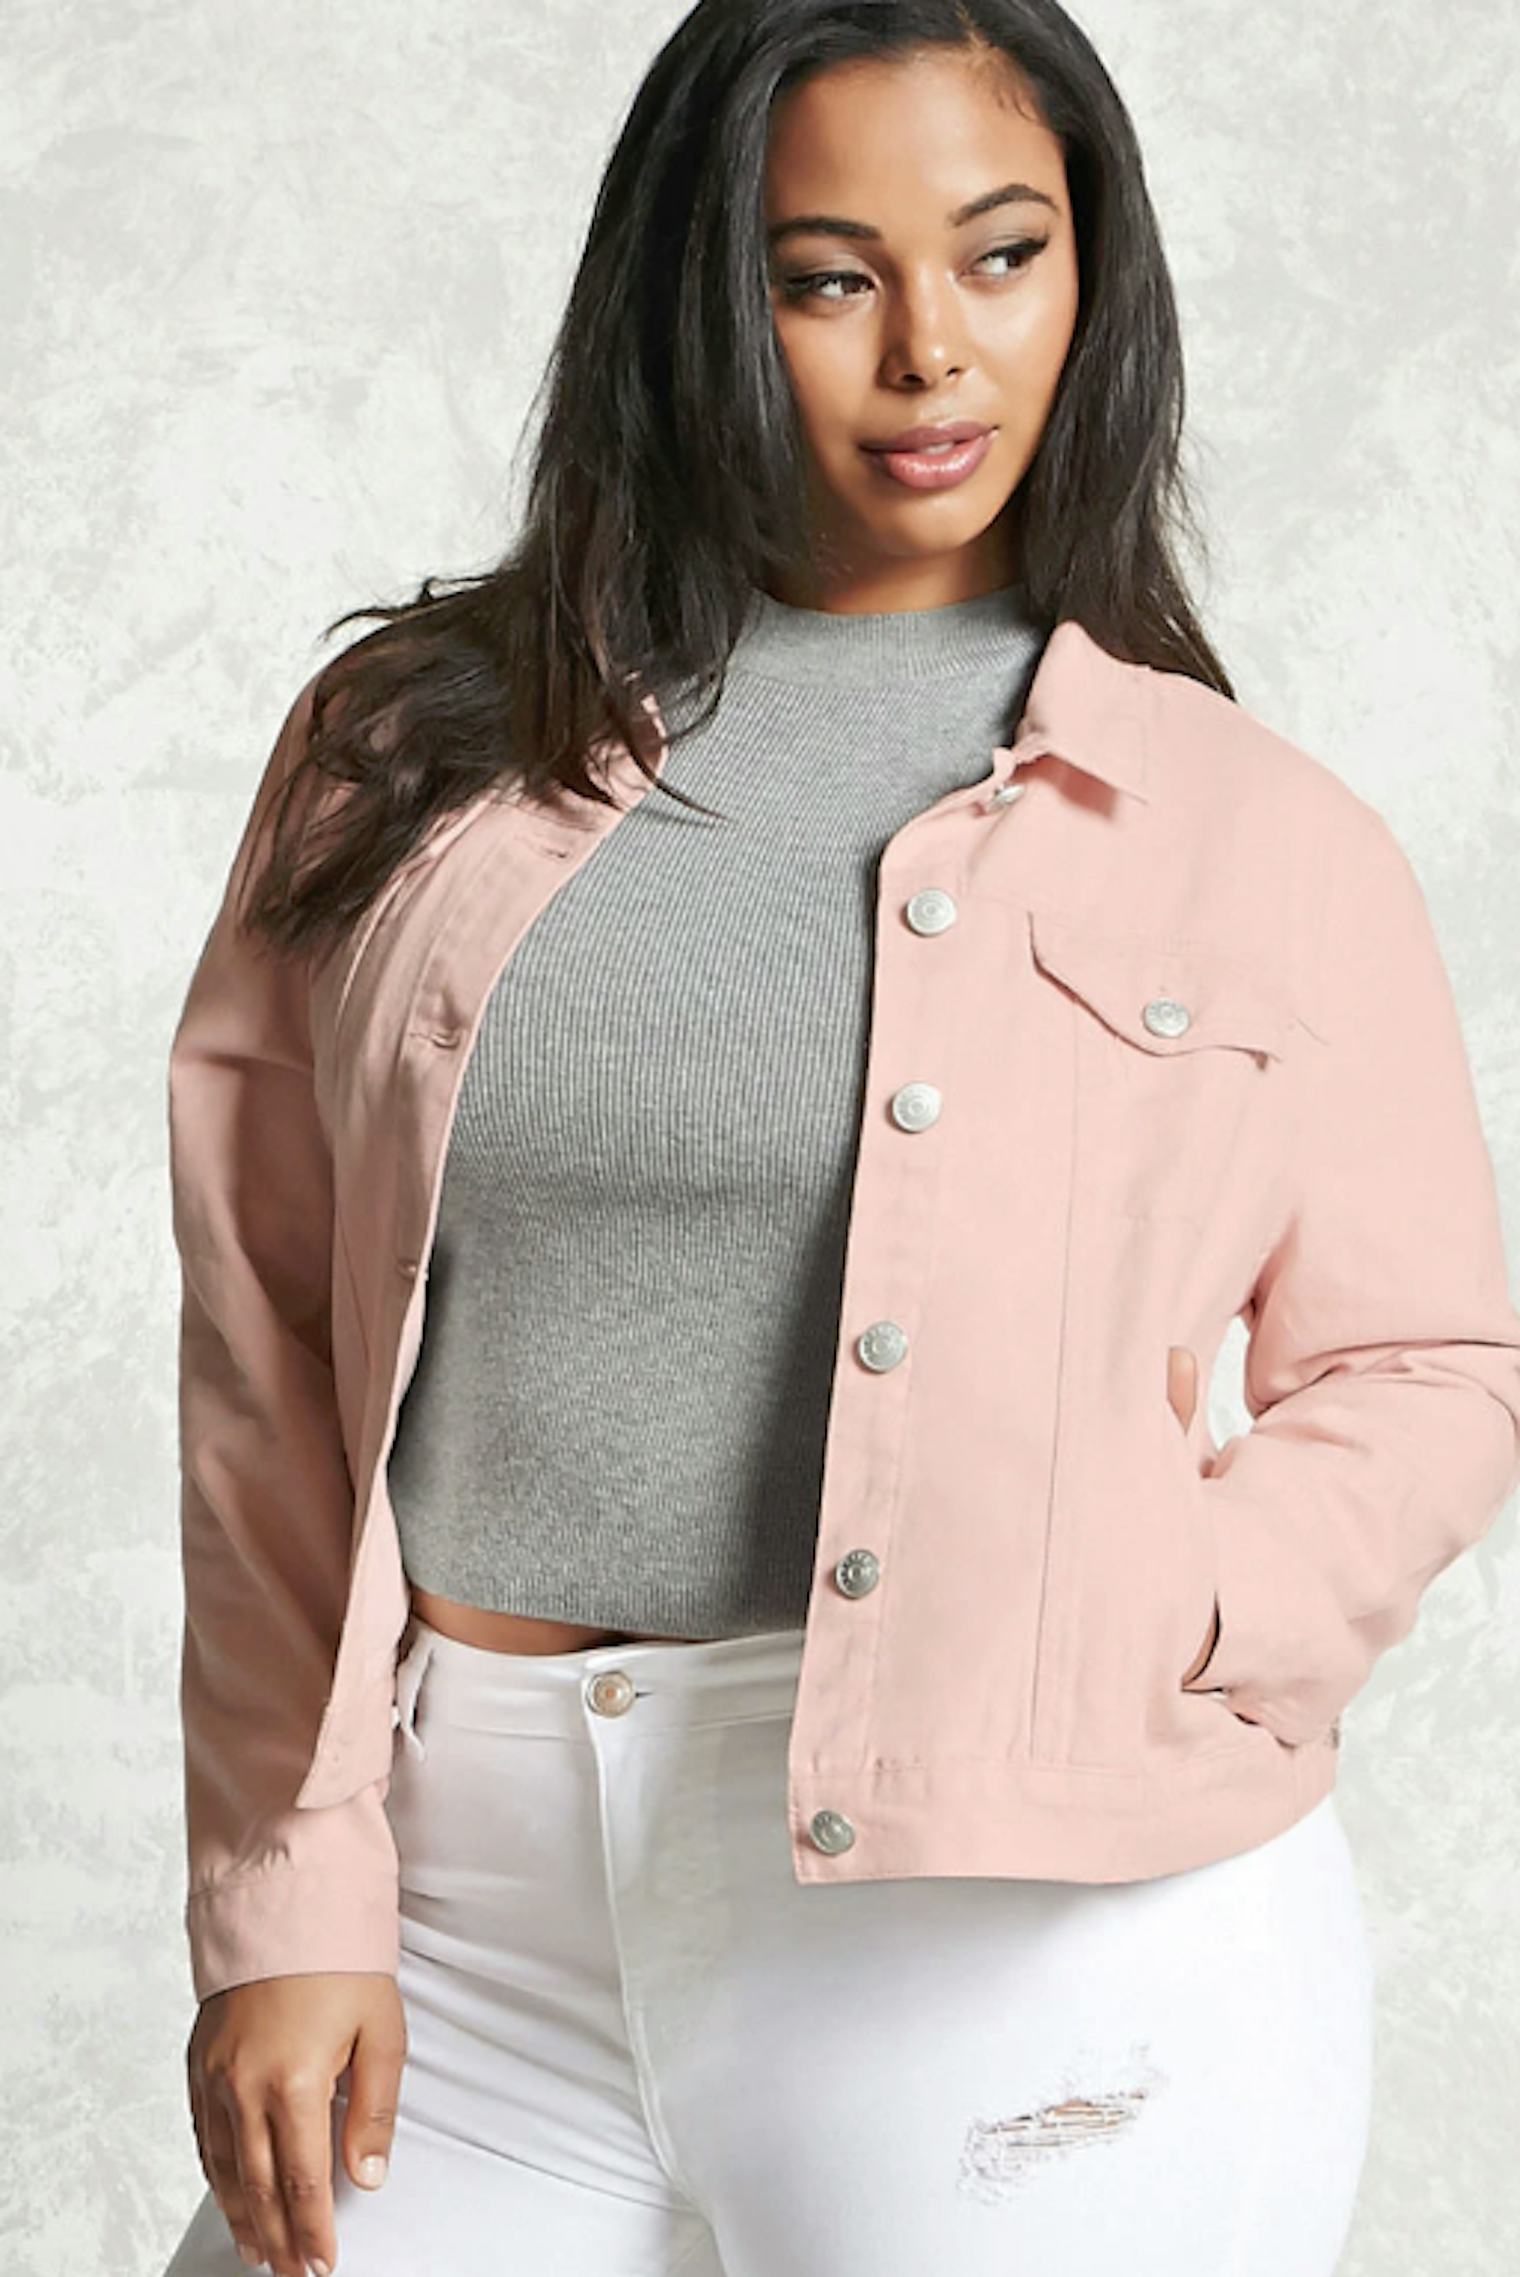 35 Millennial Pink Clothes & Accessories To Up Your Outfit Game